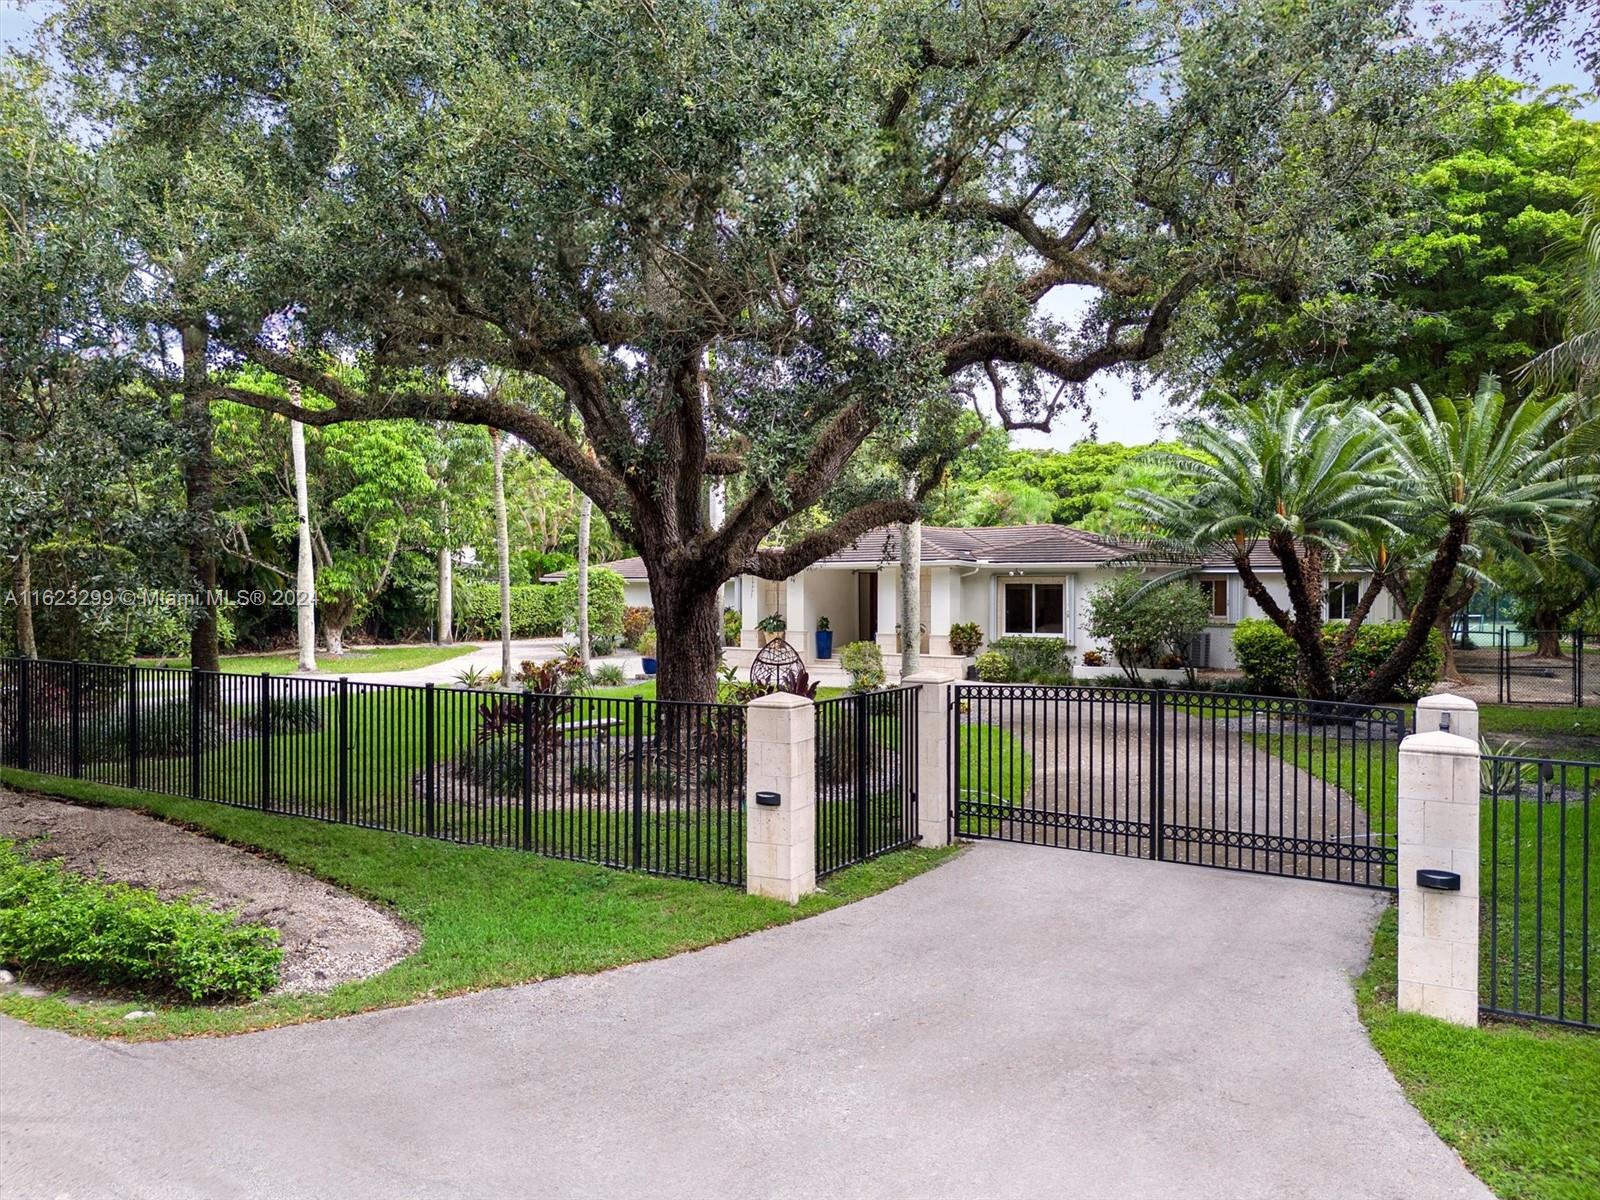 Welcome to your private oasis in North Pinecrest! This stunning one-story gated retreat spans 7,476 total sq. ft. on a lushly landscaped 50,529 sq. ft. lot, blending luxury and tranquility. The spacious 4BR/3BA main house boasts a new gourmet kitchen with Viking appliances, living room, dining room, family room, home office, and media room. Other amenities include a 1BR/1BA guest house & fitness studio w/ half bath. The expansive backyard is an entertainer's paradise, with a sparkling pool, Jacuzzi, and summer kitchen. Enjoy the lighted north/south tennis court, relax in the tiki hut, or stroll the nature trail. Additional features include a newer roof, whole-house generator, hurricane protection, 2-car garage, and 2-car carport. Experience the ultimate in luxury in your private sanctuary.